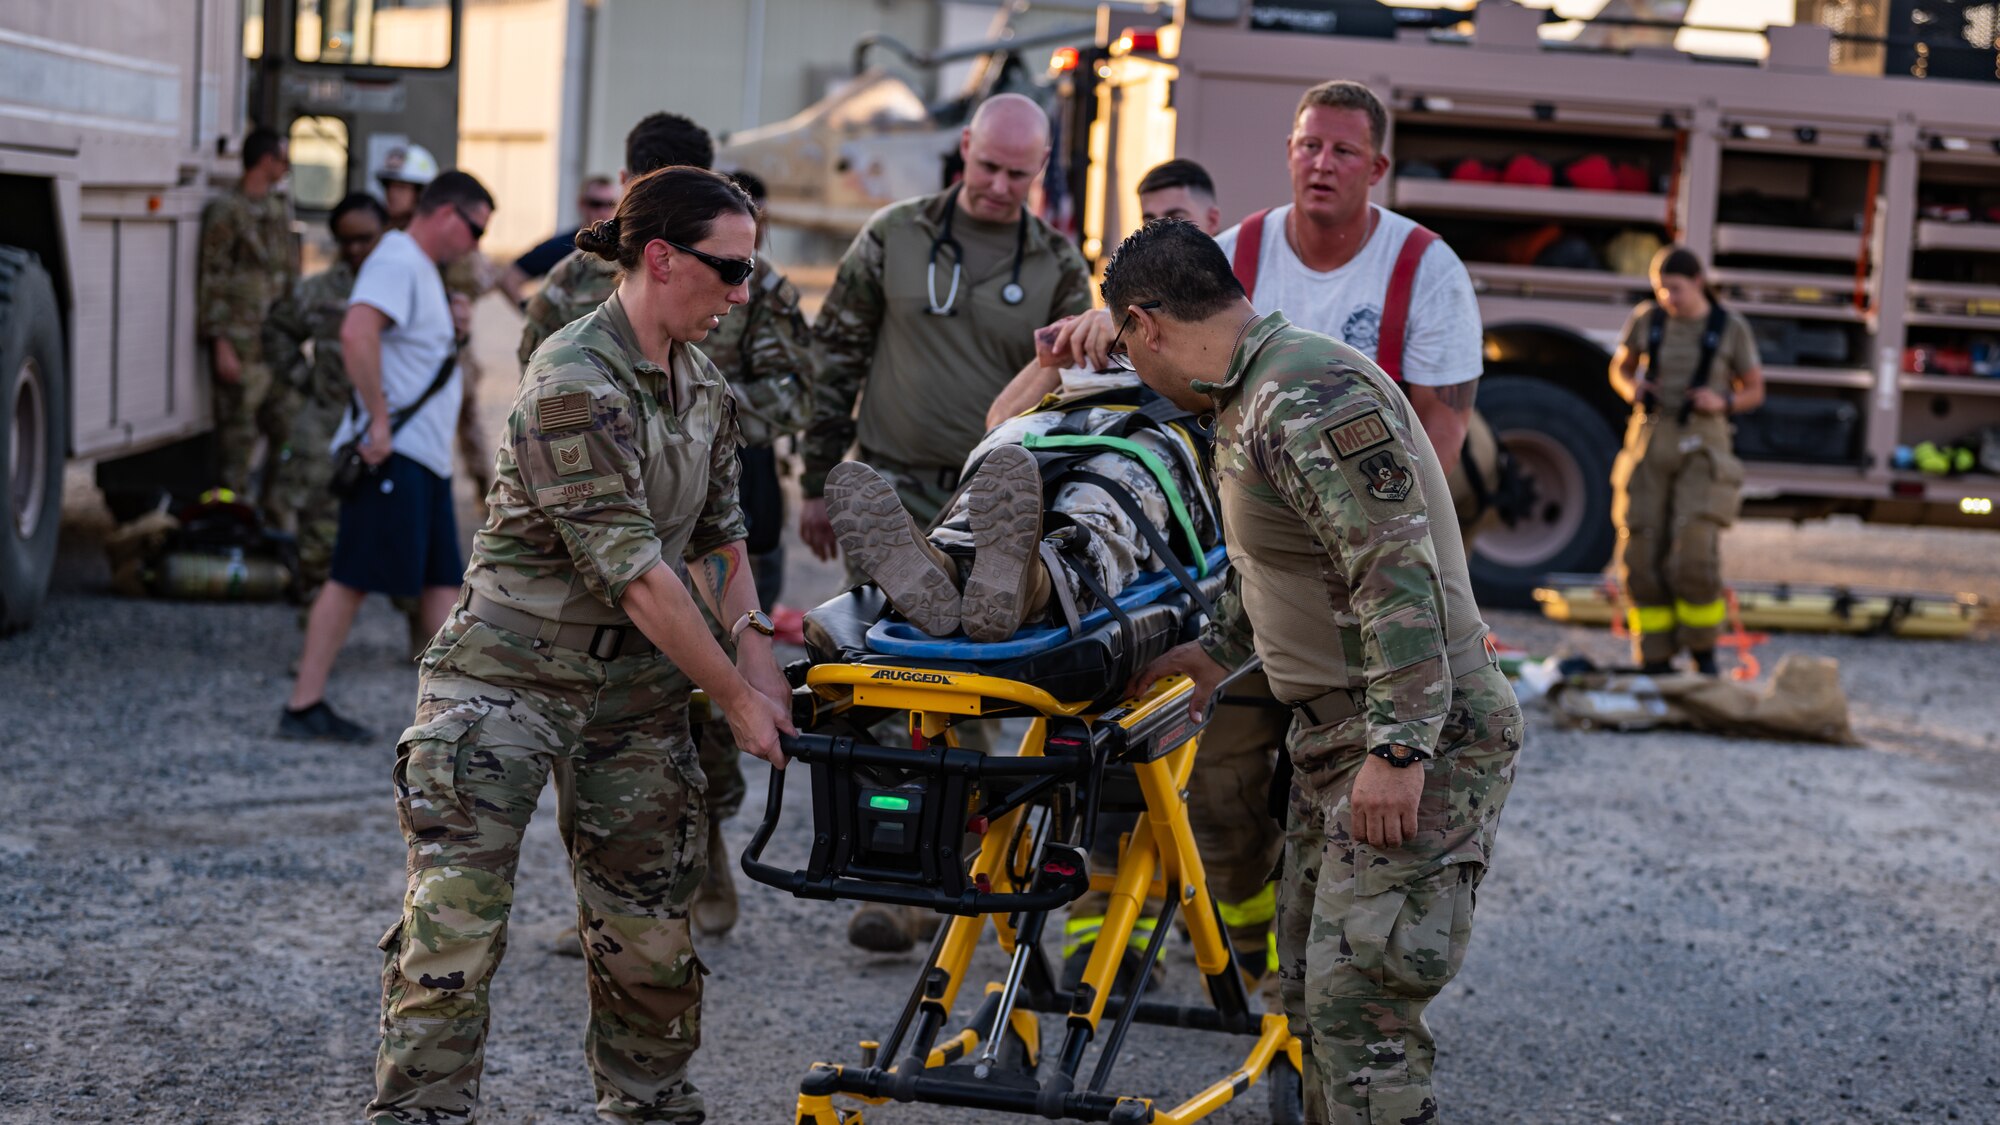 U.S. Air Force Airmen from the 386th Expeditionary Medical Squadron transfer a victim from a simulated aircraft crash to an ambulance during a medical response exercise at Ali Al Salem Air Base, Kuwait, July 17, 2023. This exercise tested the emergency response systems of U.S. and coalition forces, which allowed for a better understanding of how they can communicate and operate together in the event of a real-world emergency. (U.S. Air Force photo by Staff Sgt. Kevin Long)